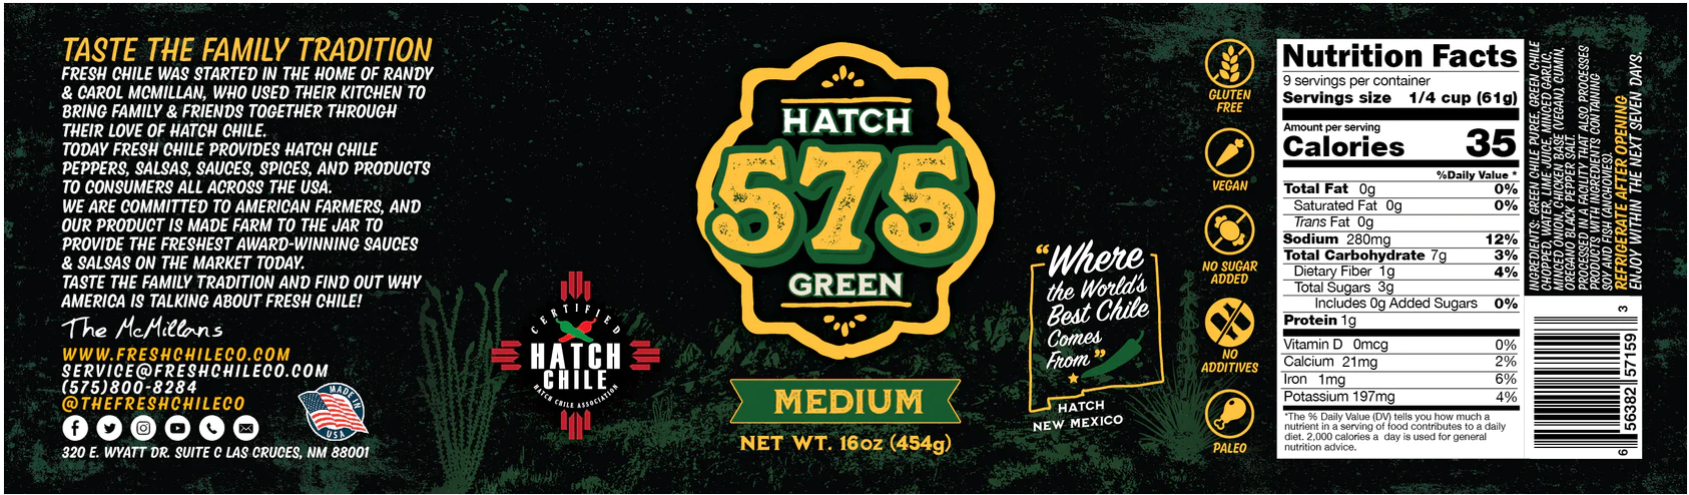 Packaging graphic of Hatch 575 Green Chile Sauce with text about tradition, quality, and taste, alongside nutritional information panel and product barcode.